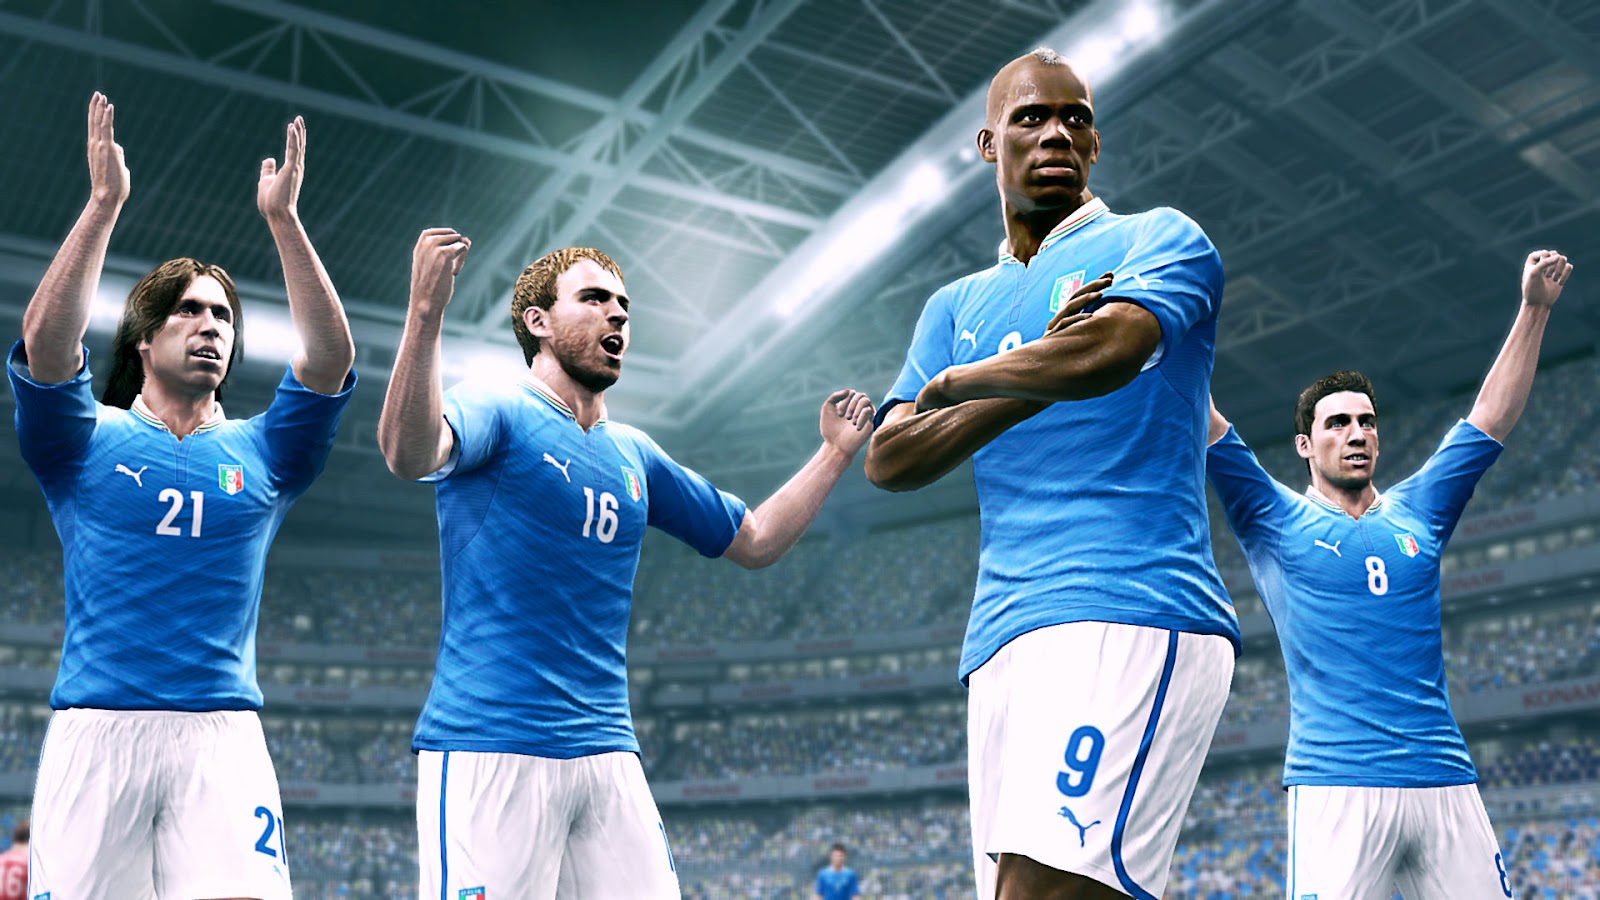 PES 2013 has 150 licensed teams, including all the teams in Spanish and  Italian top divisions